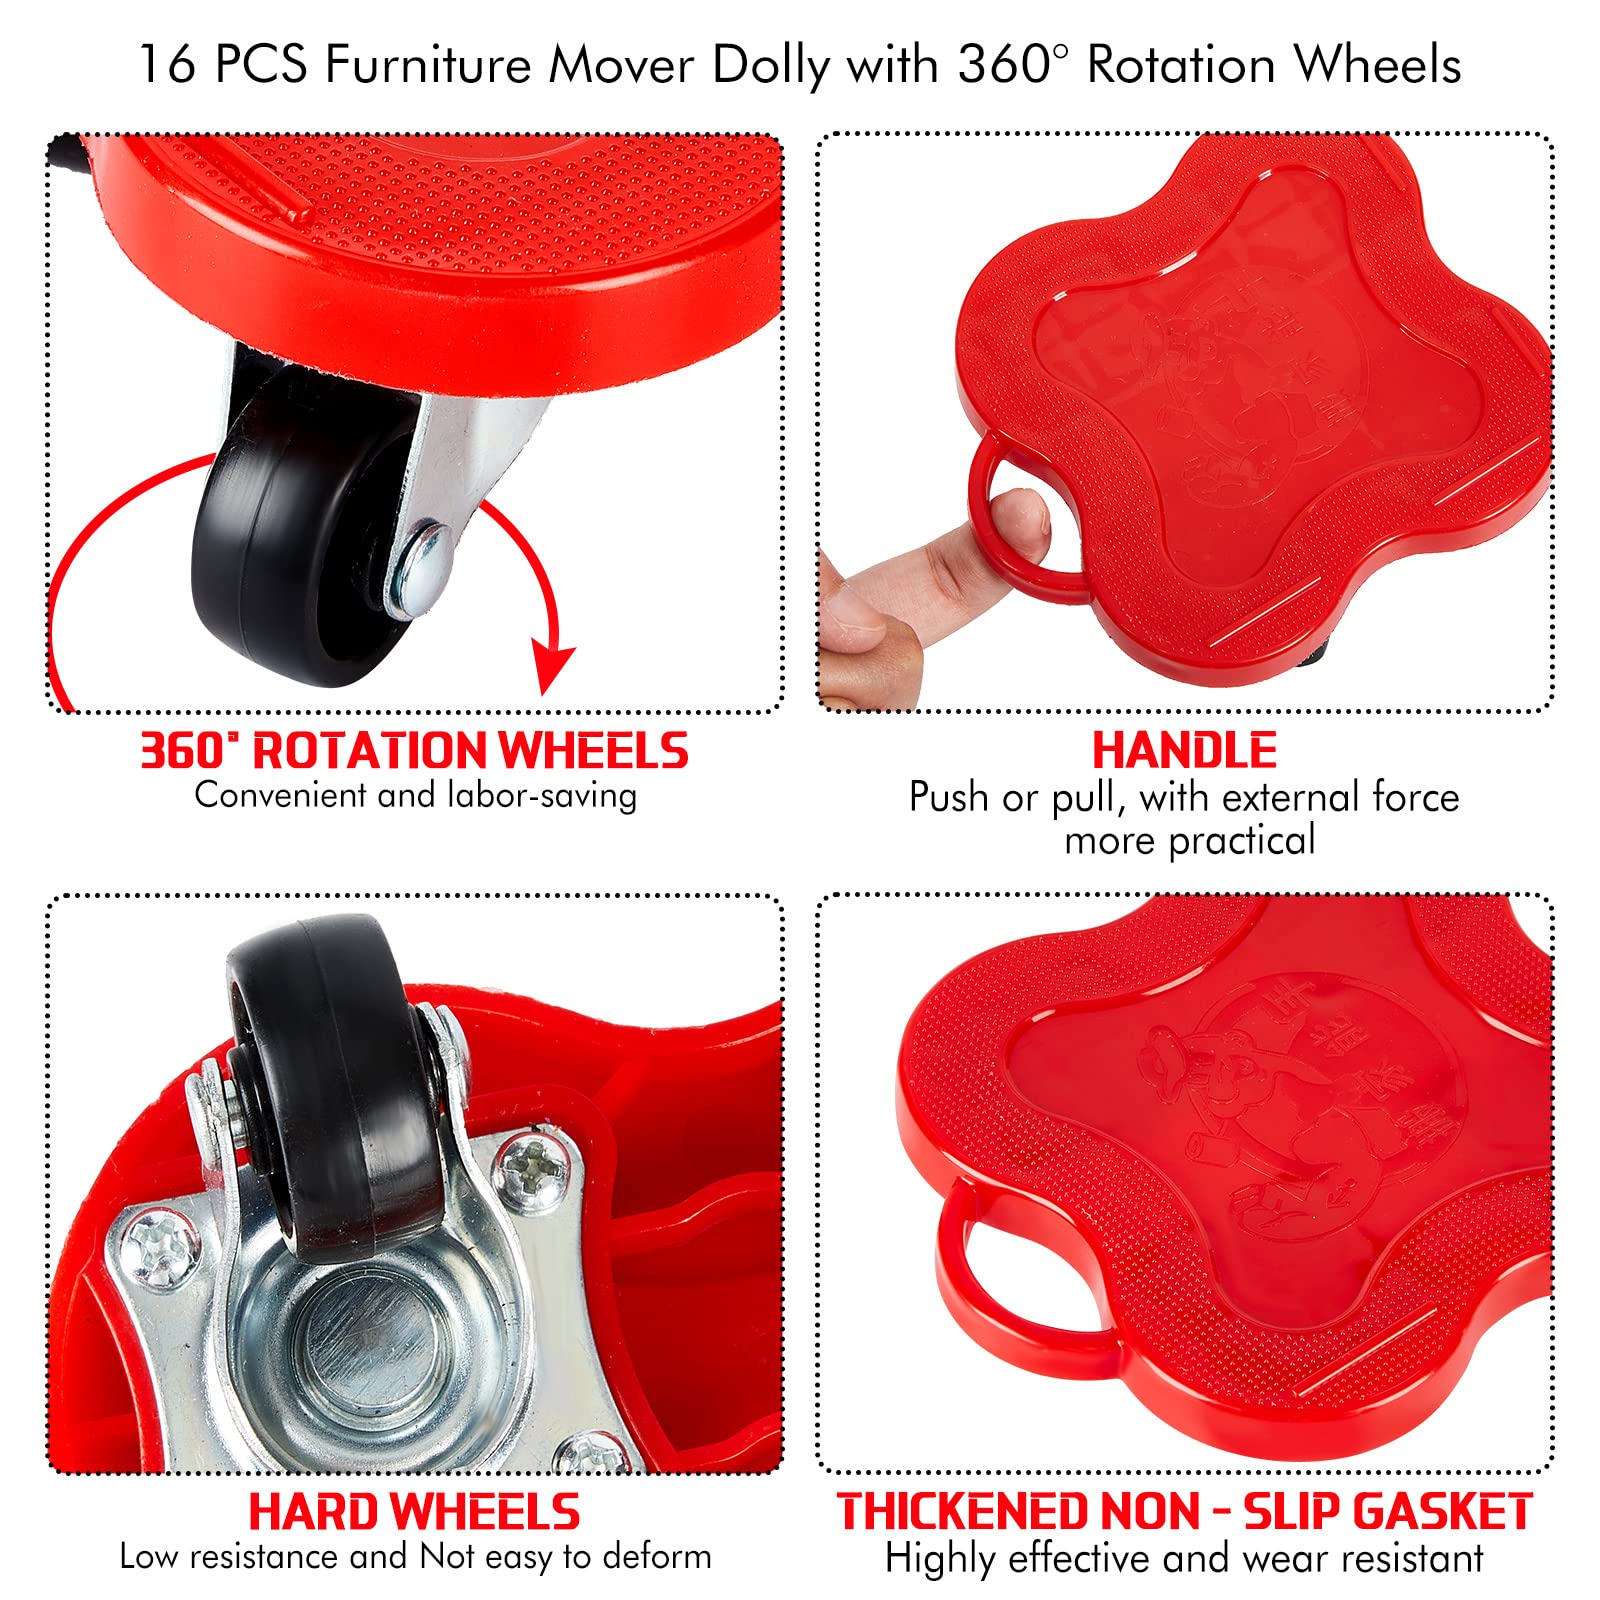 17 Pcs Furniture Mover with Wheels Furniture Lifter Set, Red 360 Degree Rotation Wheels Furniture Dolly Heavy Furniture Roller Move Tools Moving Wheels for Appliance Table Refrigerator Cabinet Sofa